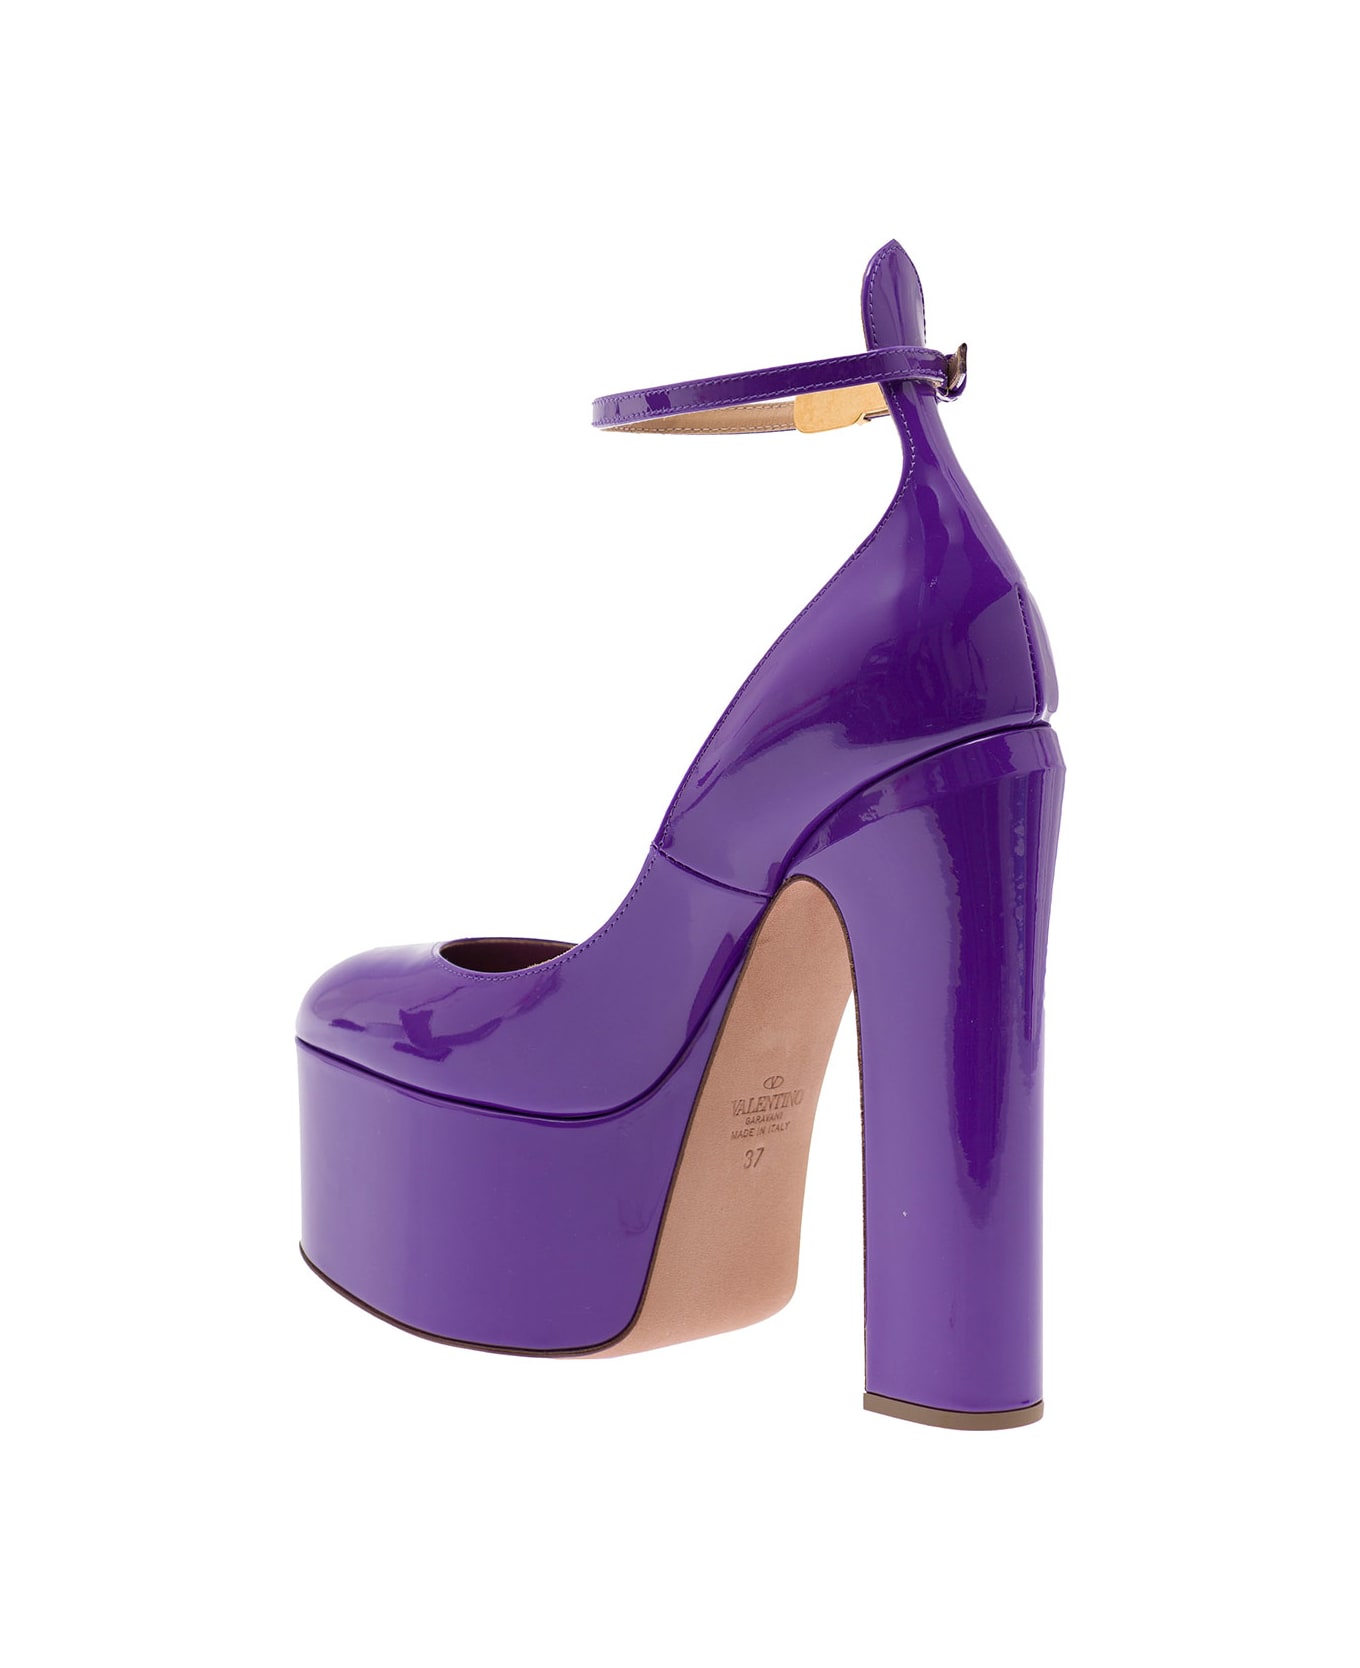 Valentino Garavani 'tan-go' Purple Décolleté With Platform And Vlogo Buckle In Patent Leather Woman - Violet ハイヒール